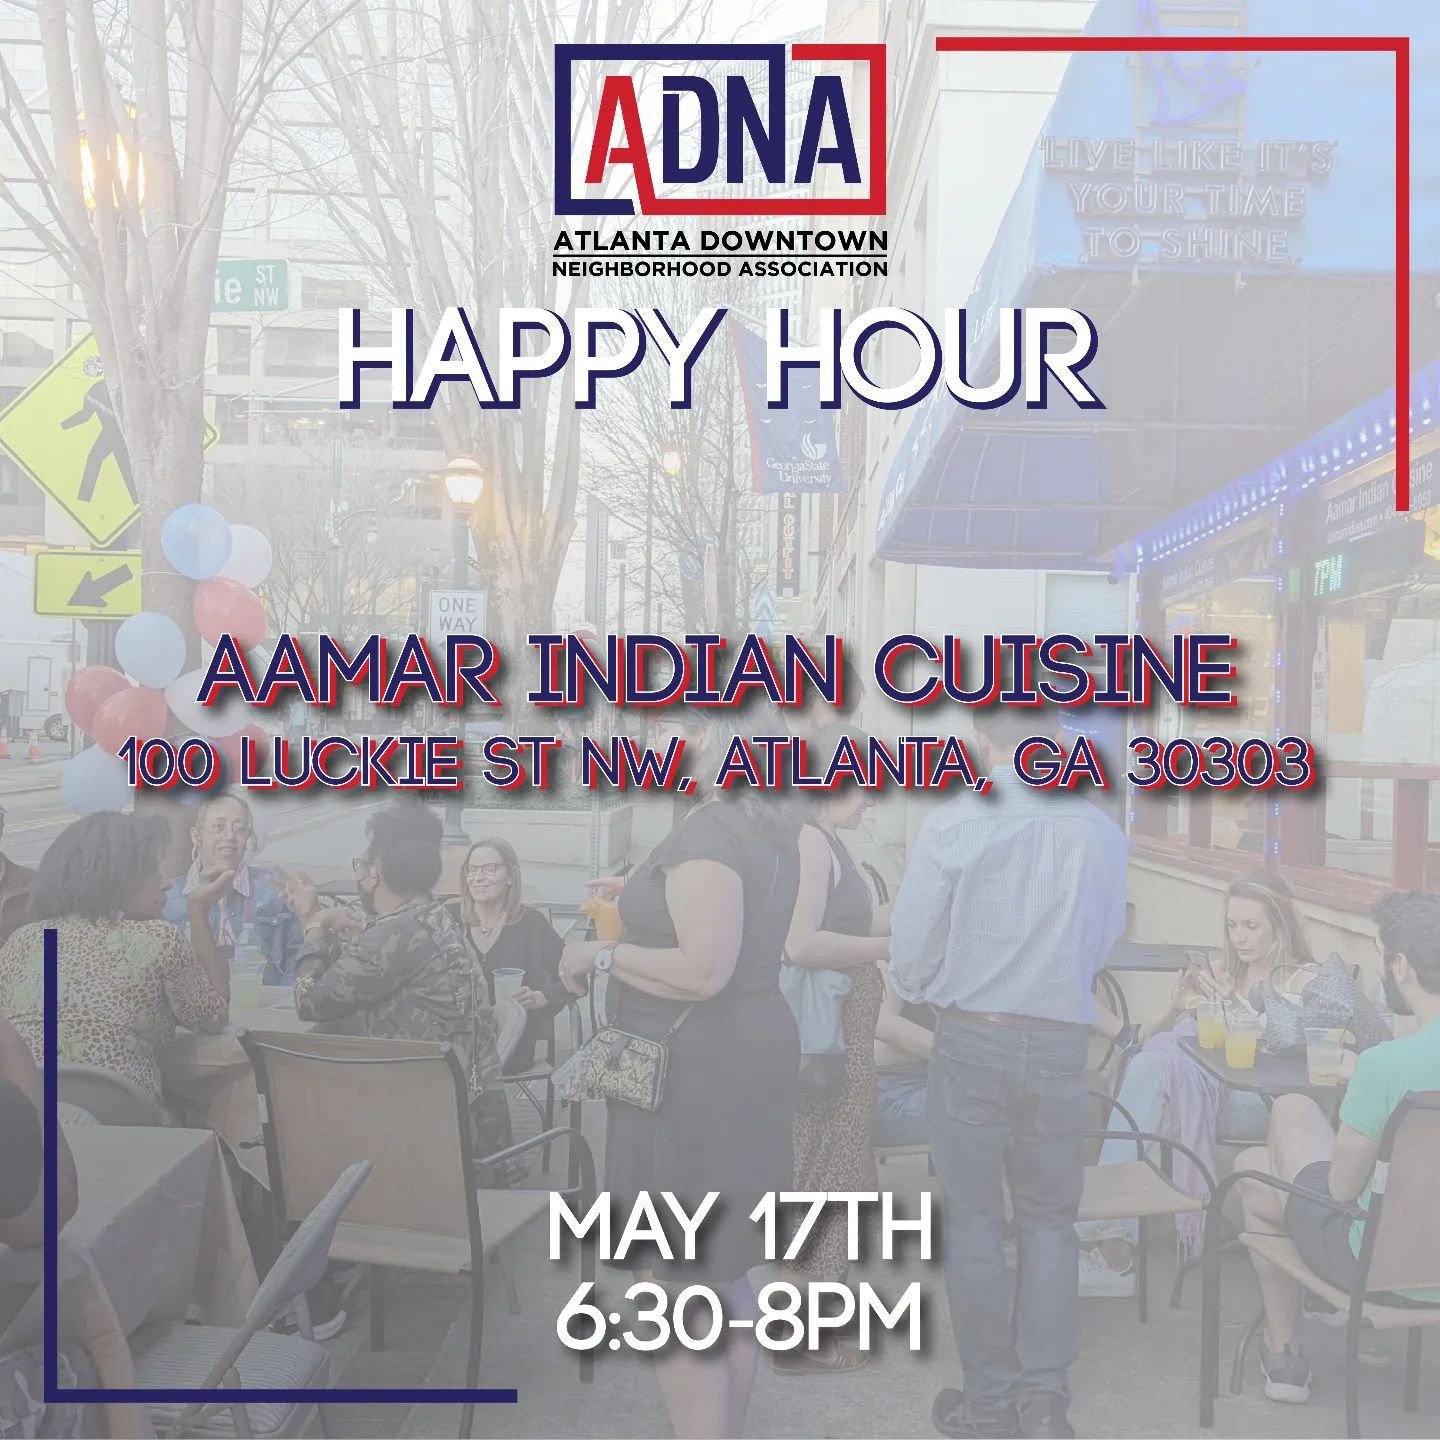 Join us on Friday, May 17th, at Aamar Indian Cuisine for our May Happy Hour!!